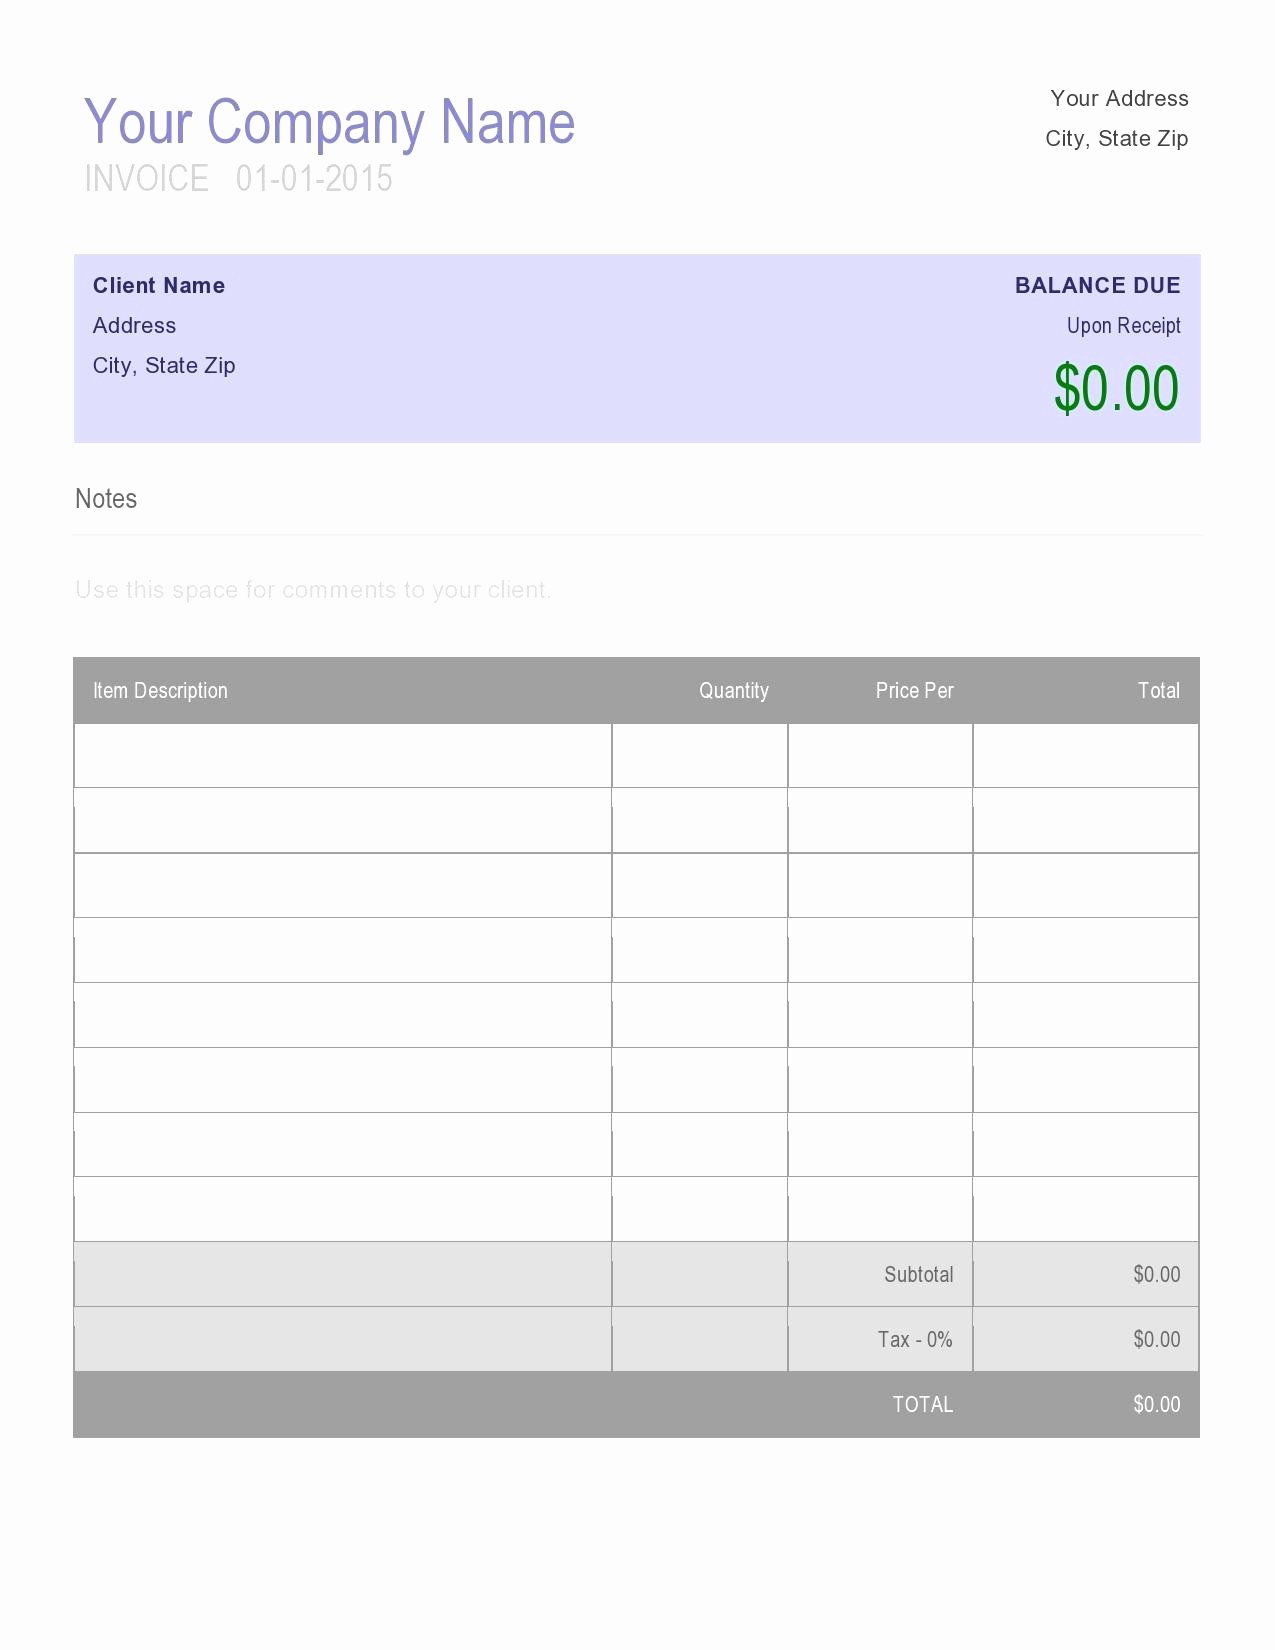 Free Lawn Care Invoice Template Beautiful Invoice Template for Lawn Services Good Care